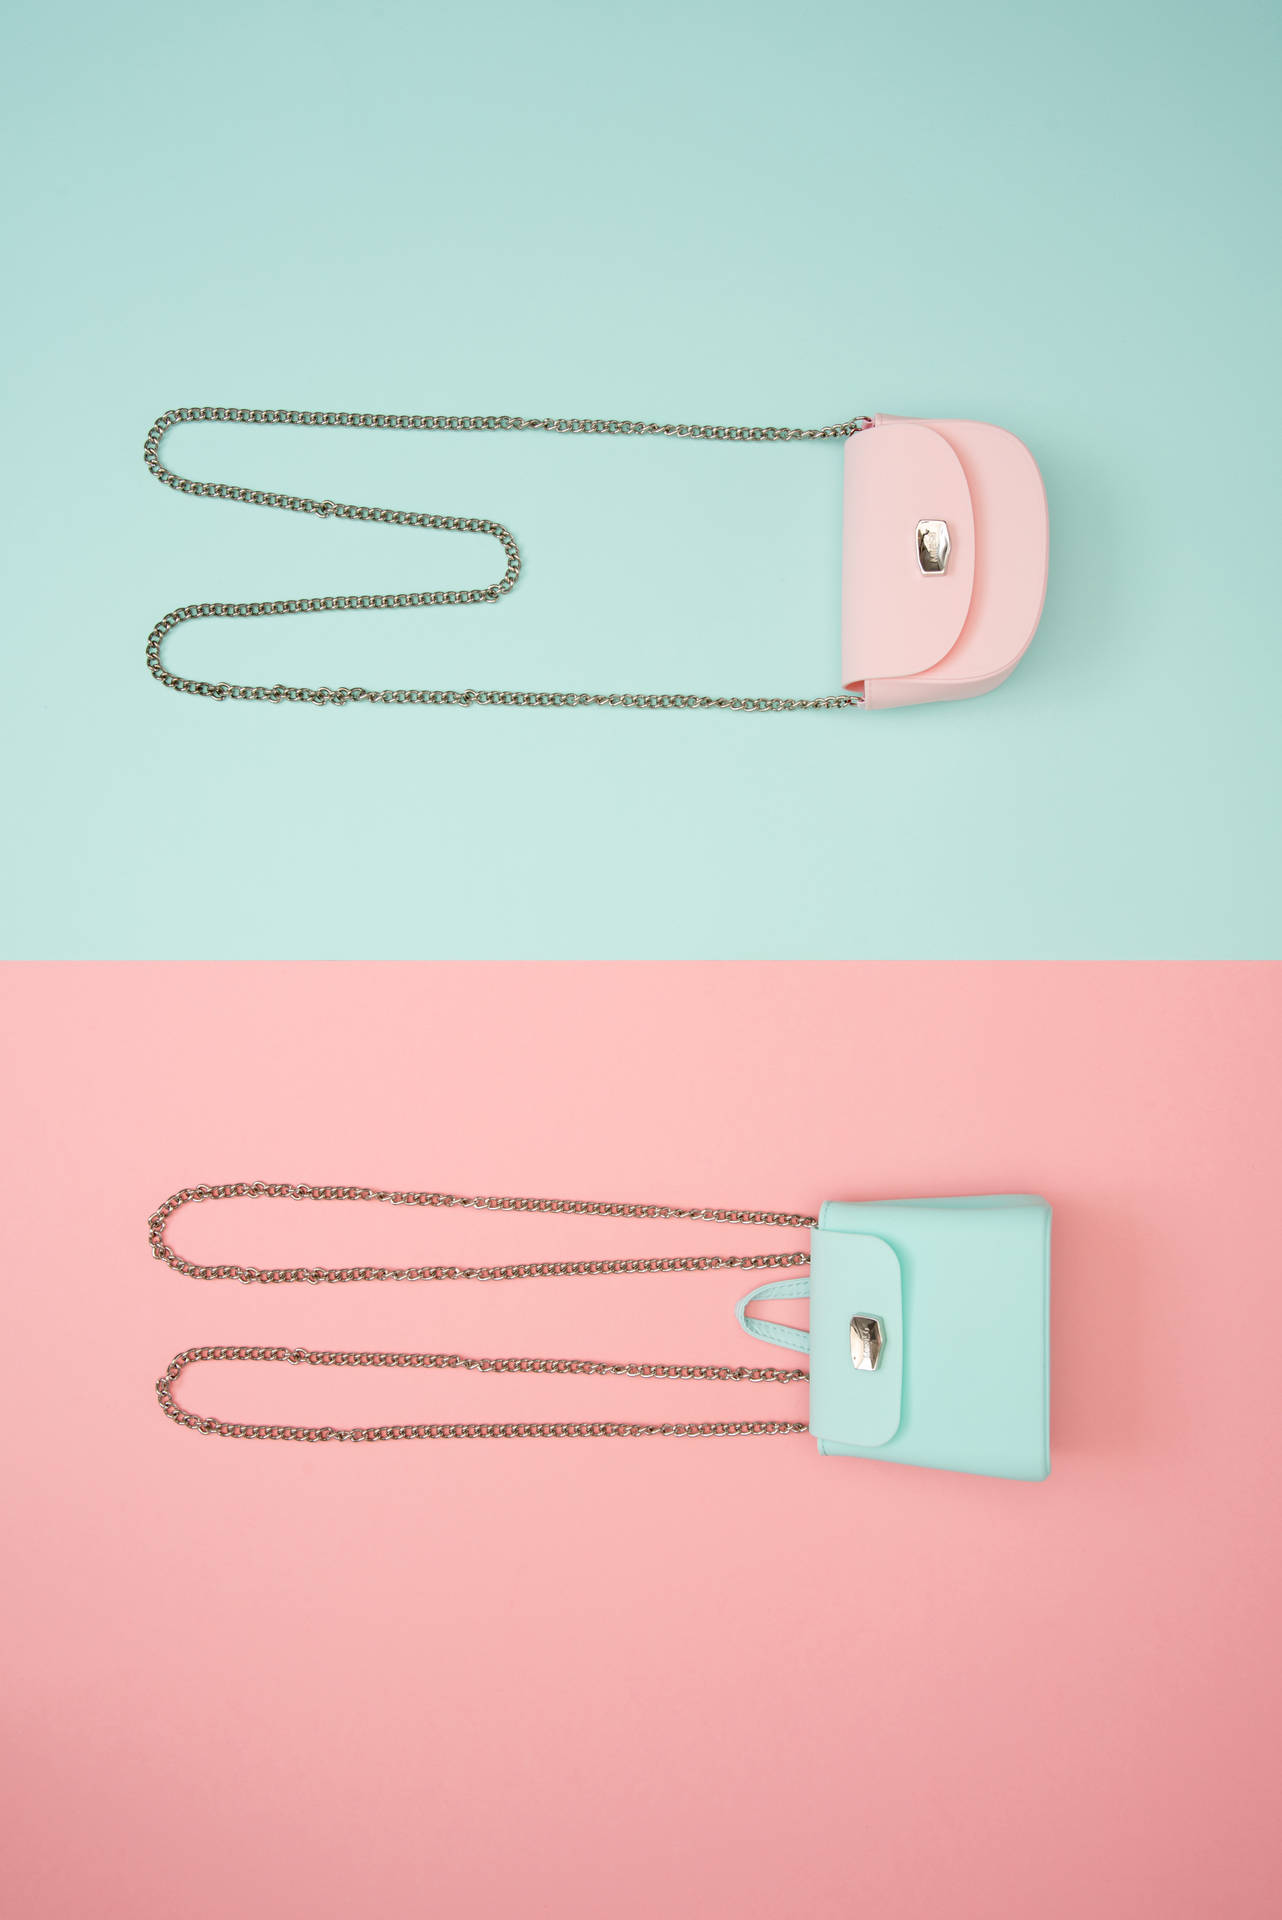 Pastel Aesthetic 3914X5863 Wallpaper and Background Image